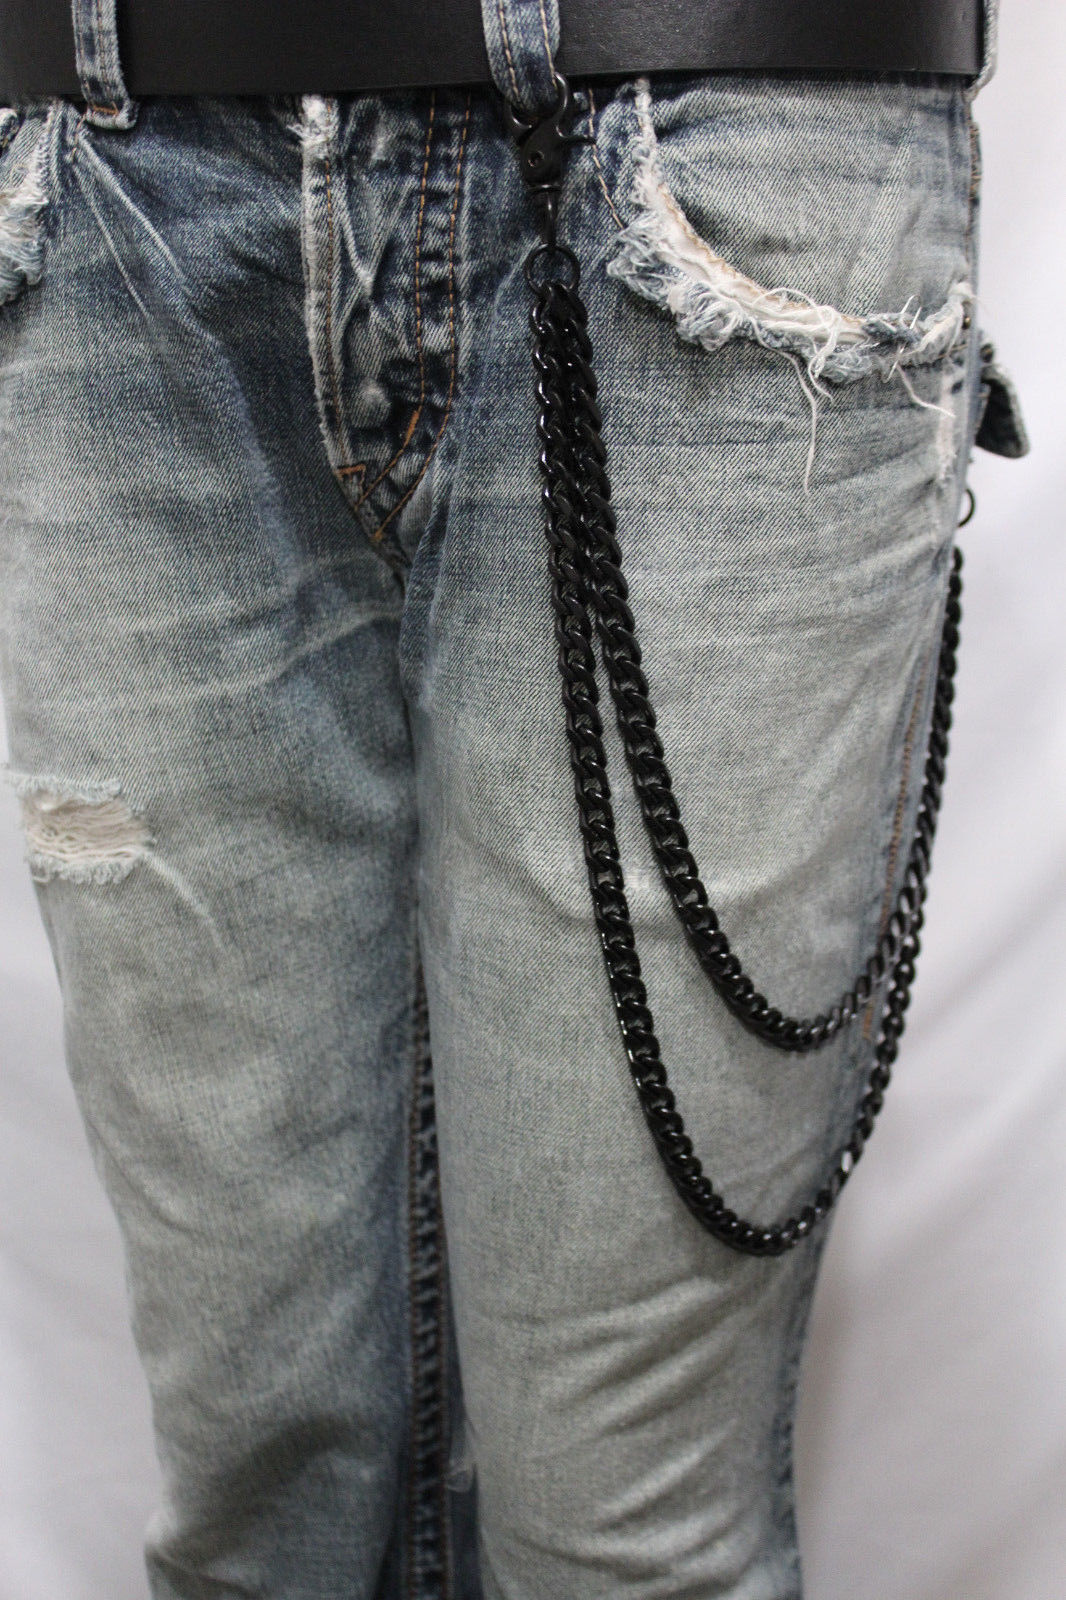 21 Double Strand Wallet Chain - Black